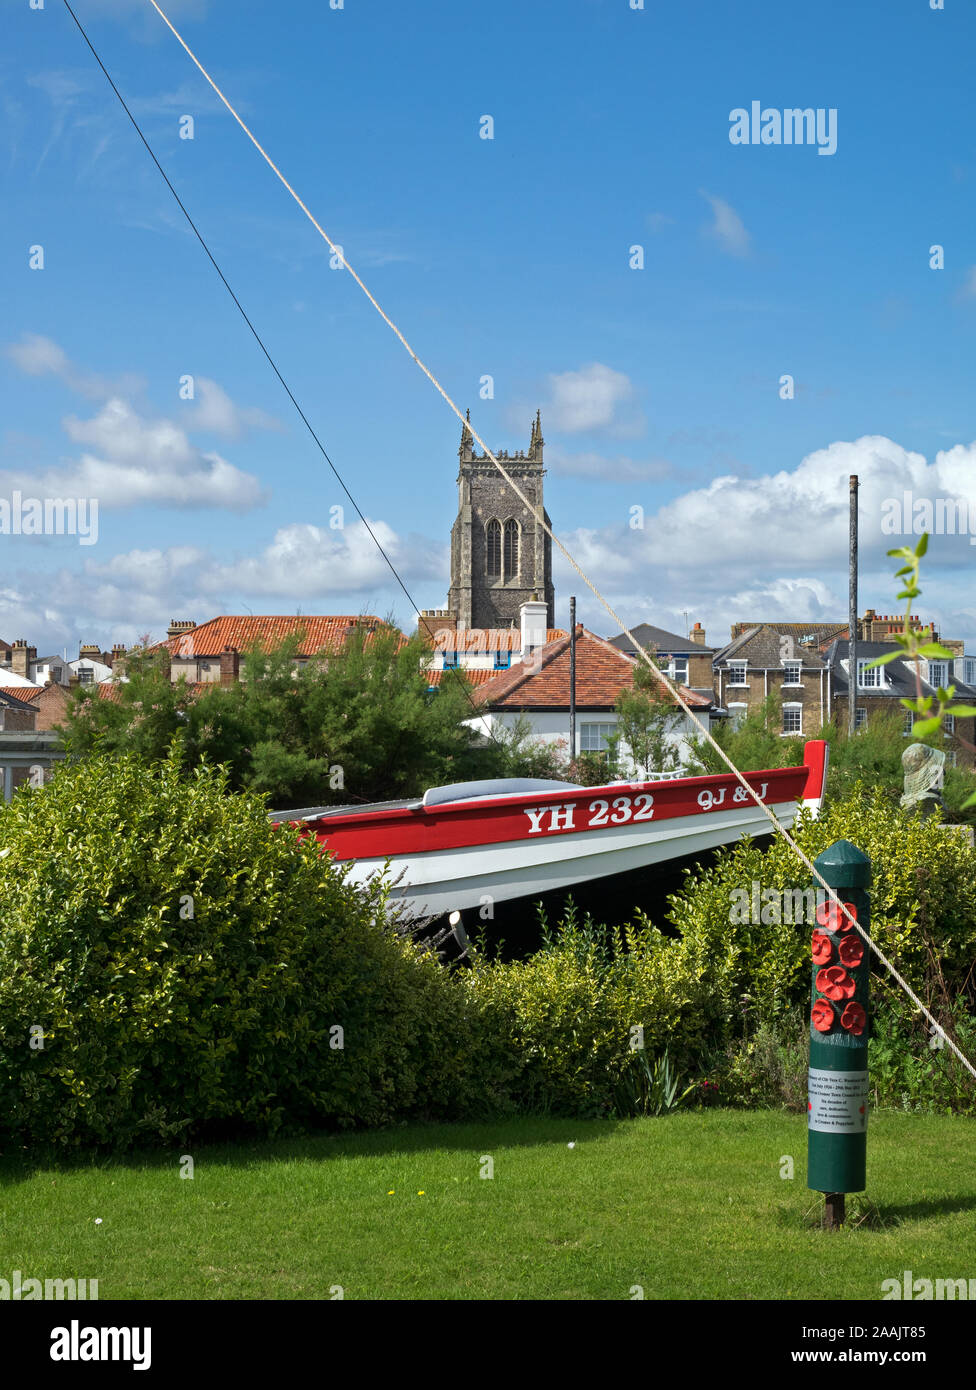 Life-boatman's Henry Blogg's Lifeboat with The Skyline with the Rooftops of Cromer and tower of the parish church of St Peter & Paul, Norfolk, England Stock Photo